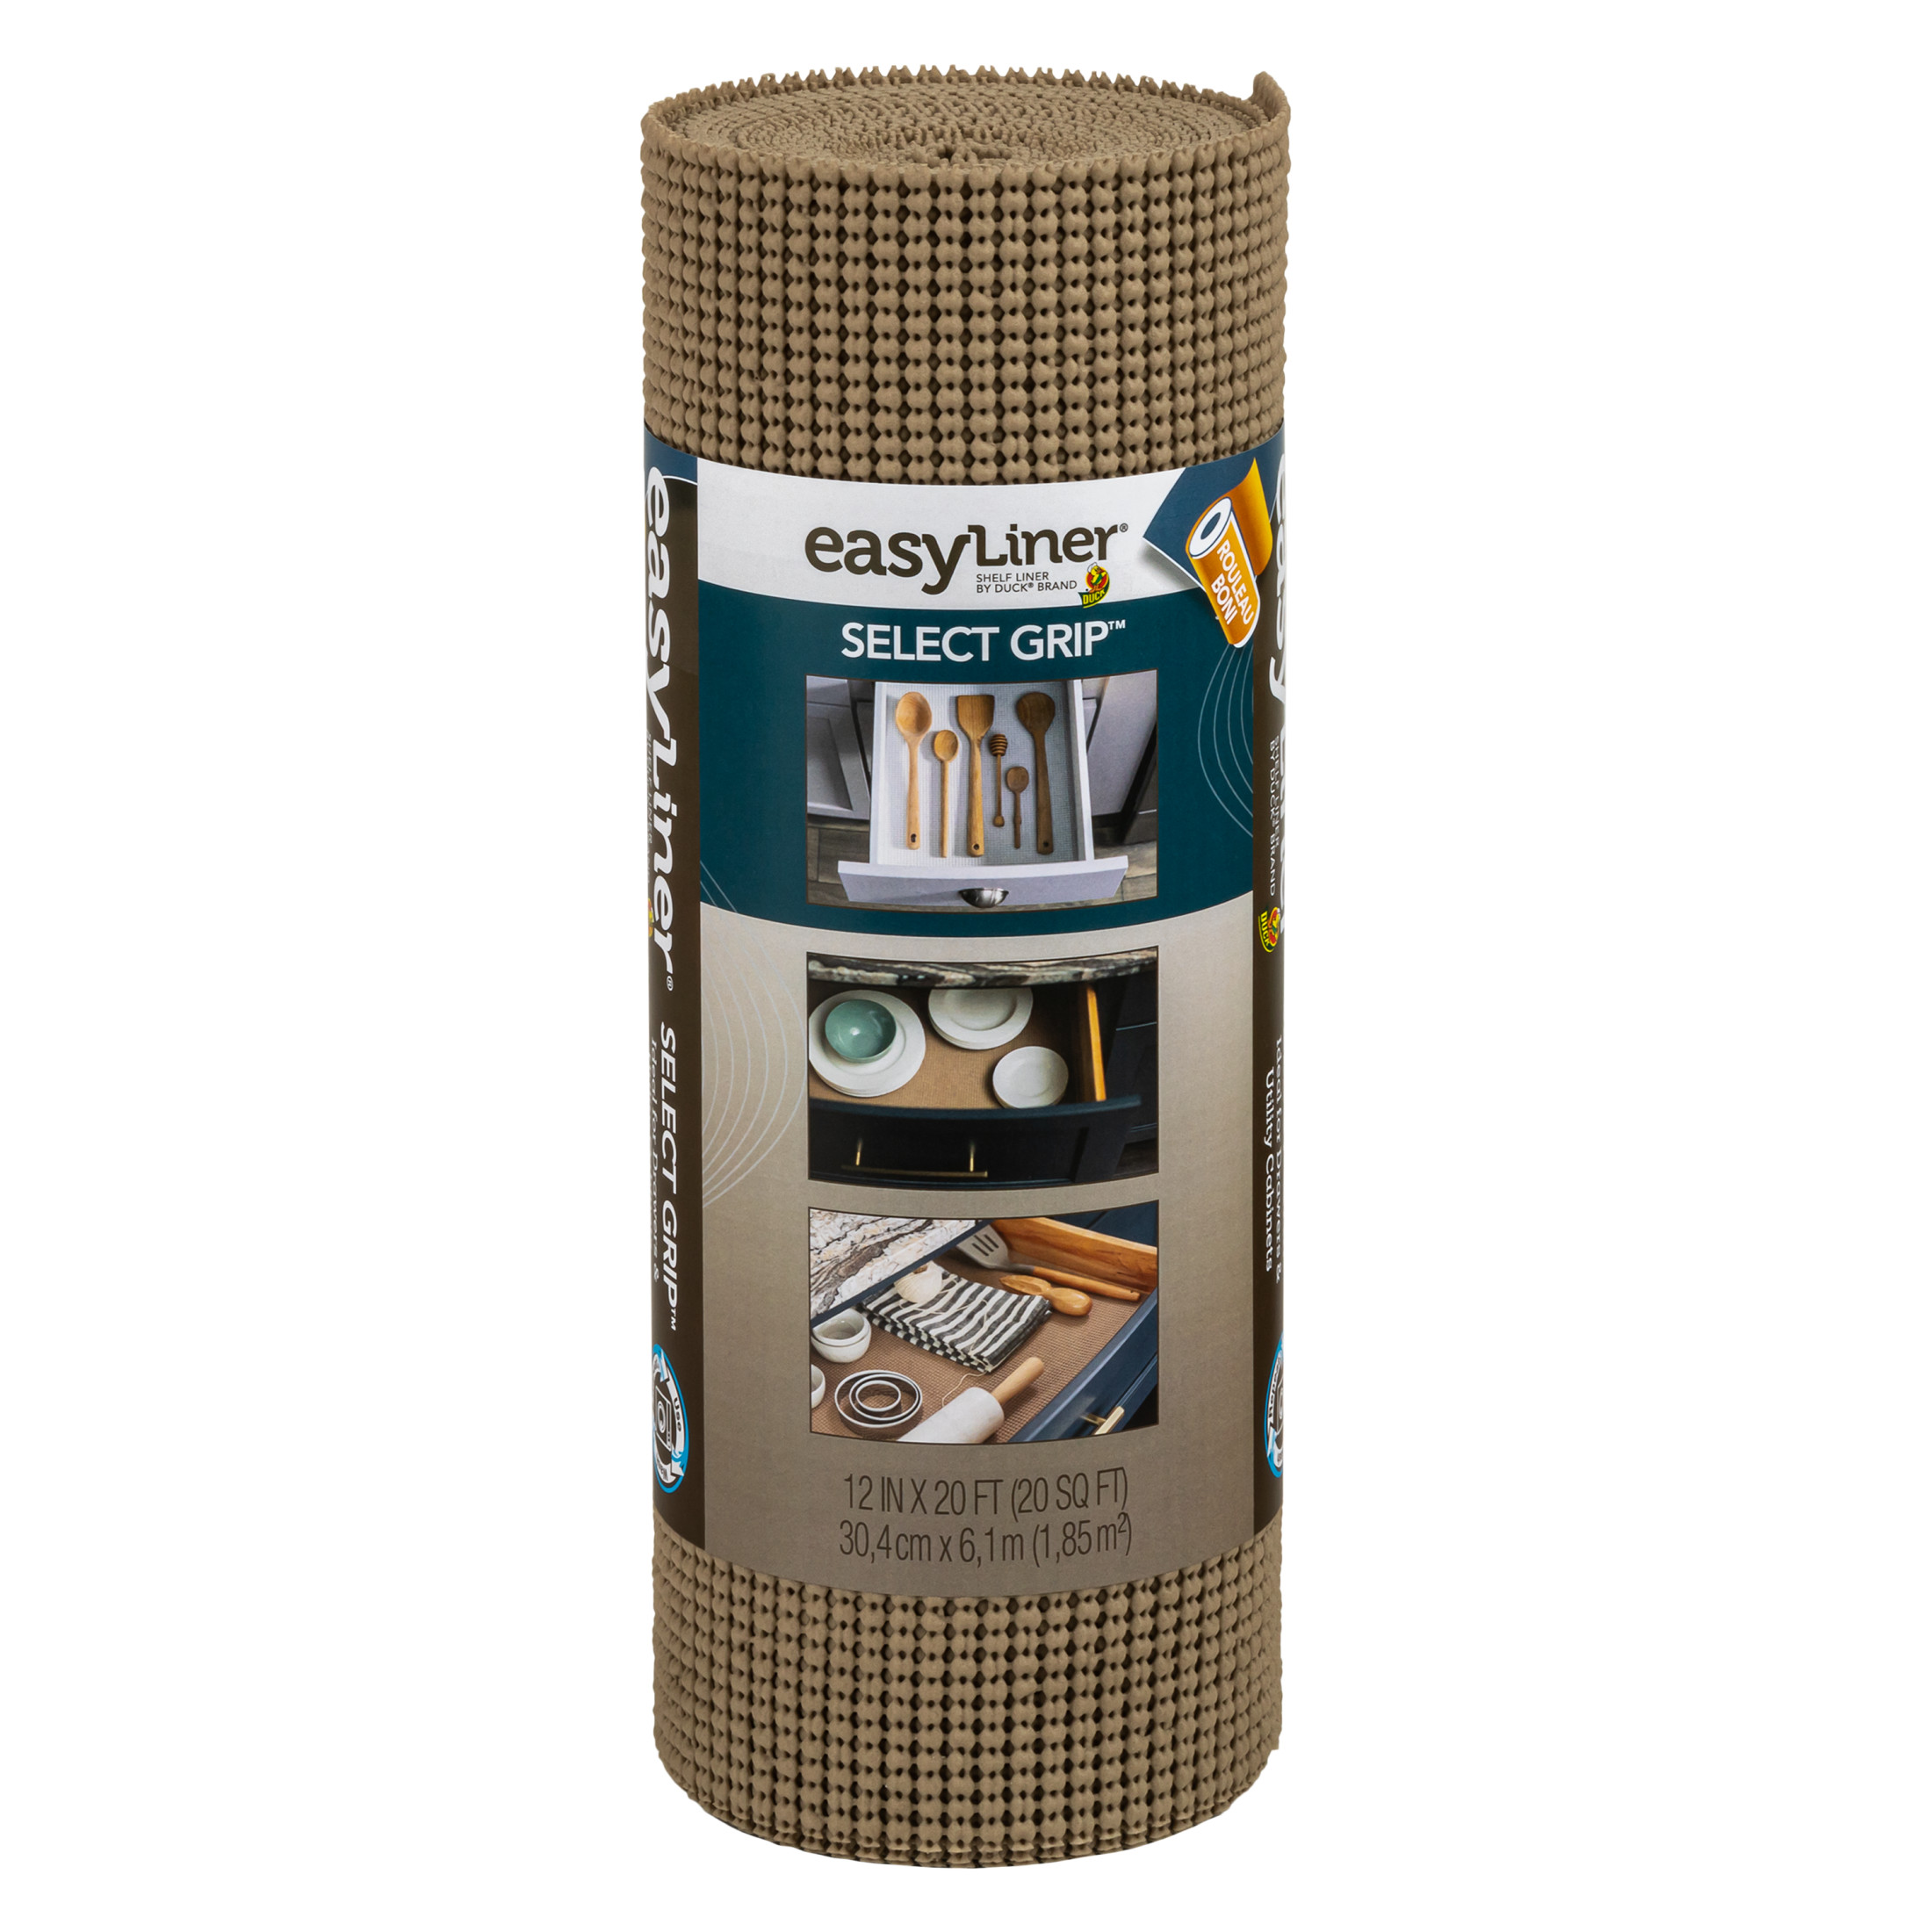 EasyLiner Select Grip Shelf Liner, Taupe, 12 in. x 20 ft. Roll - image 4 of 11